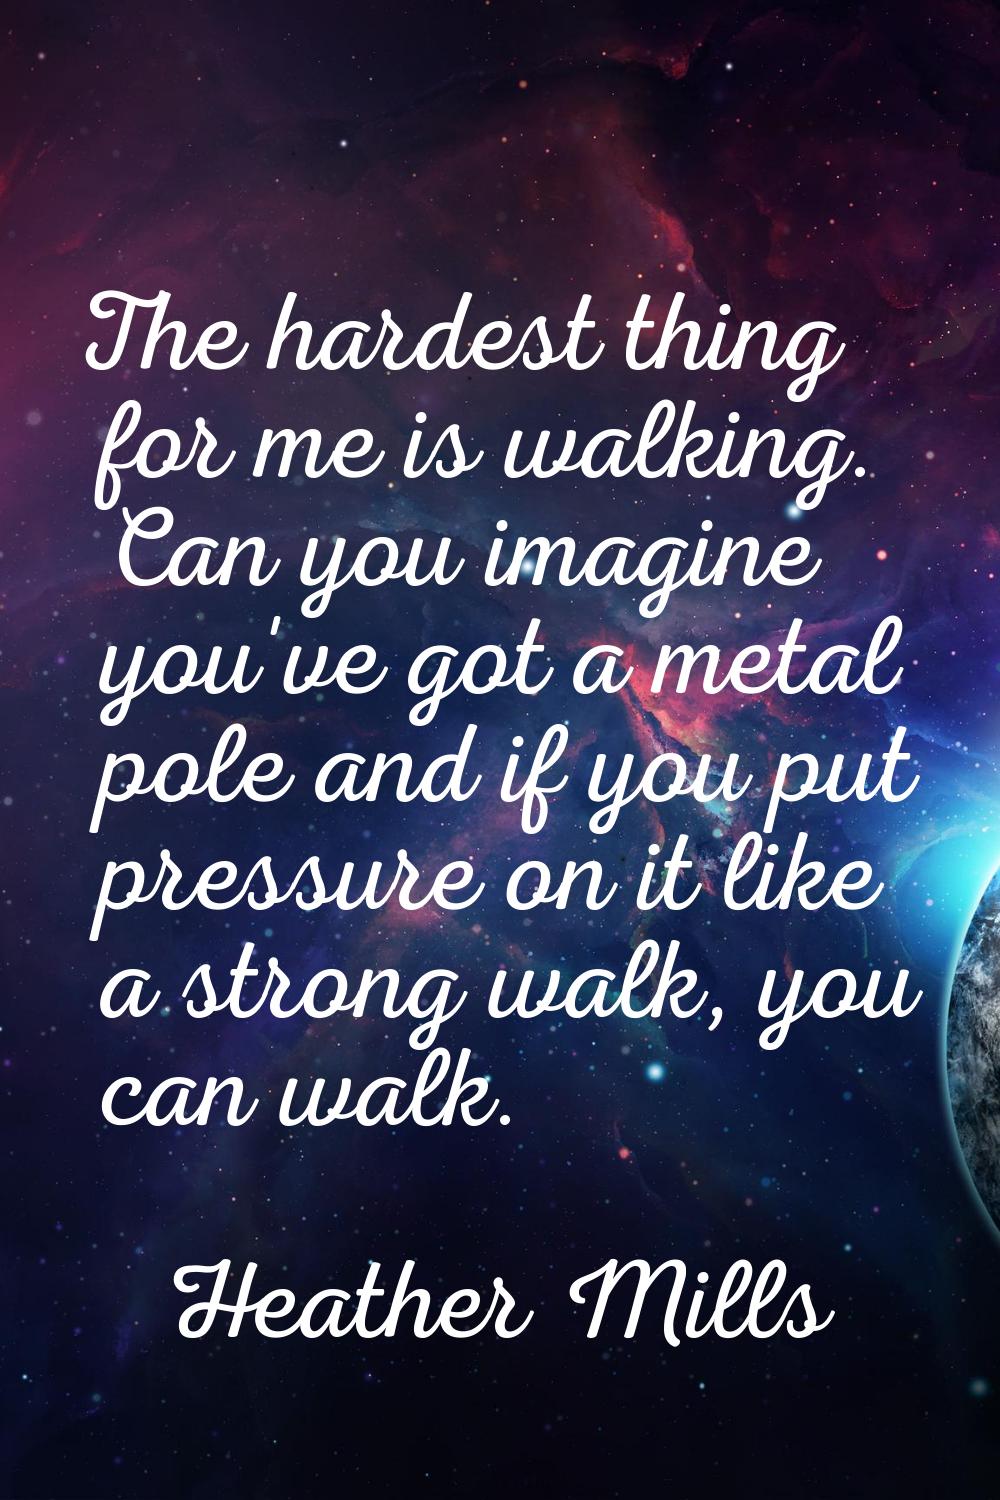 The hardest thing for me is walking. Can you imagine you've got a metal pole and if you put pressur